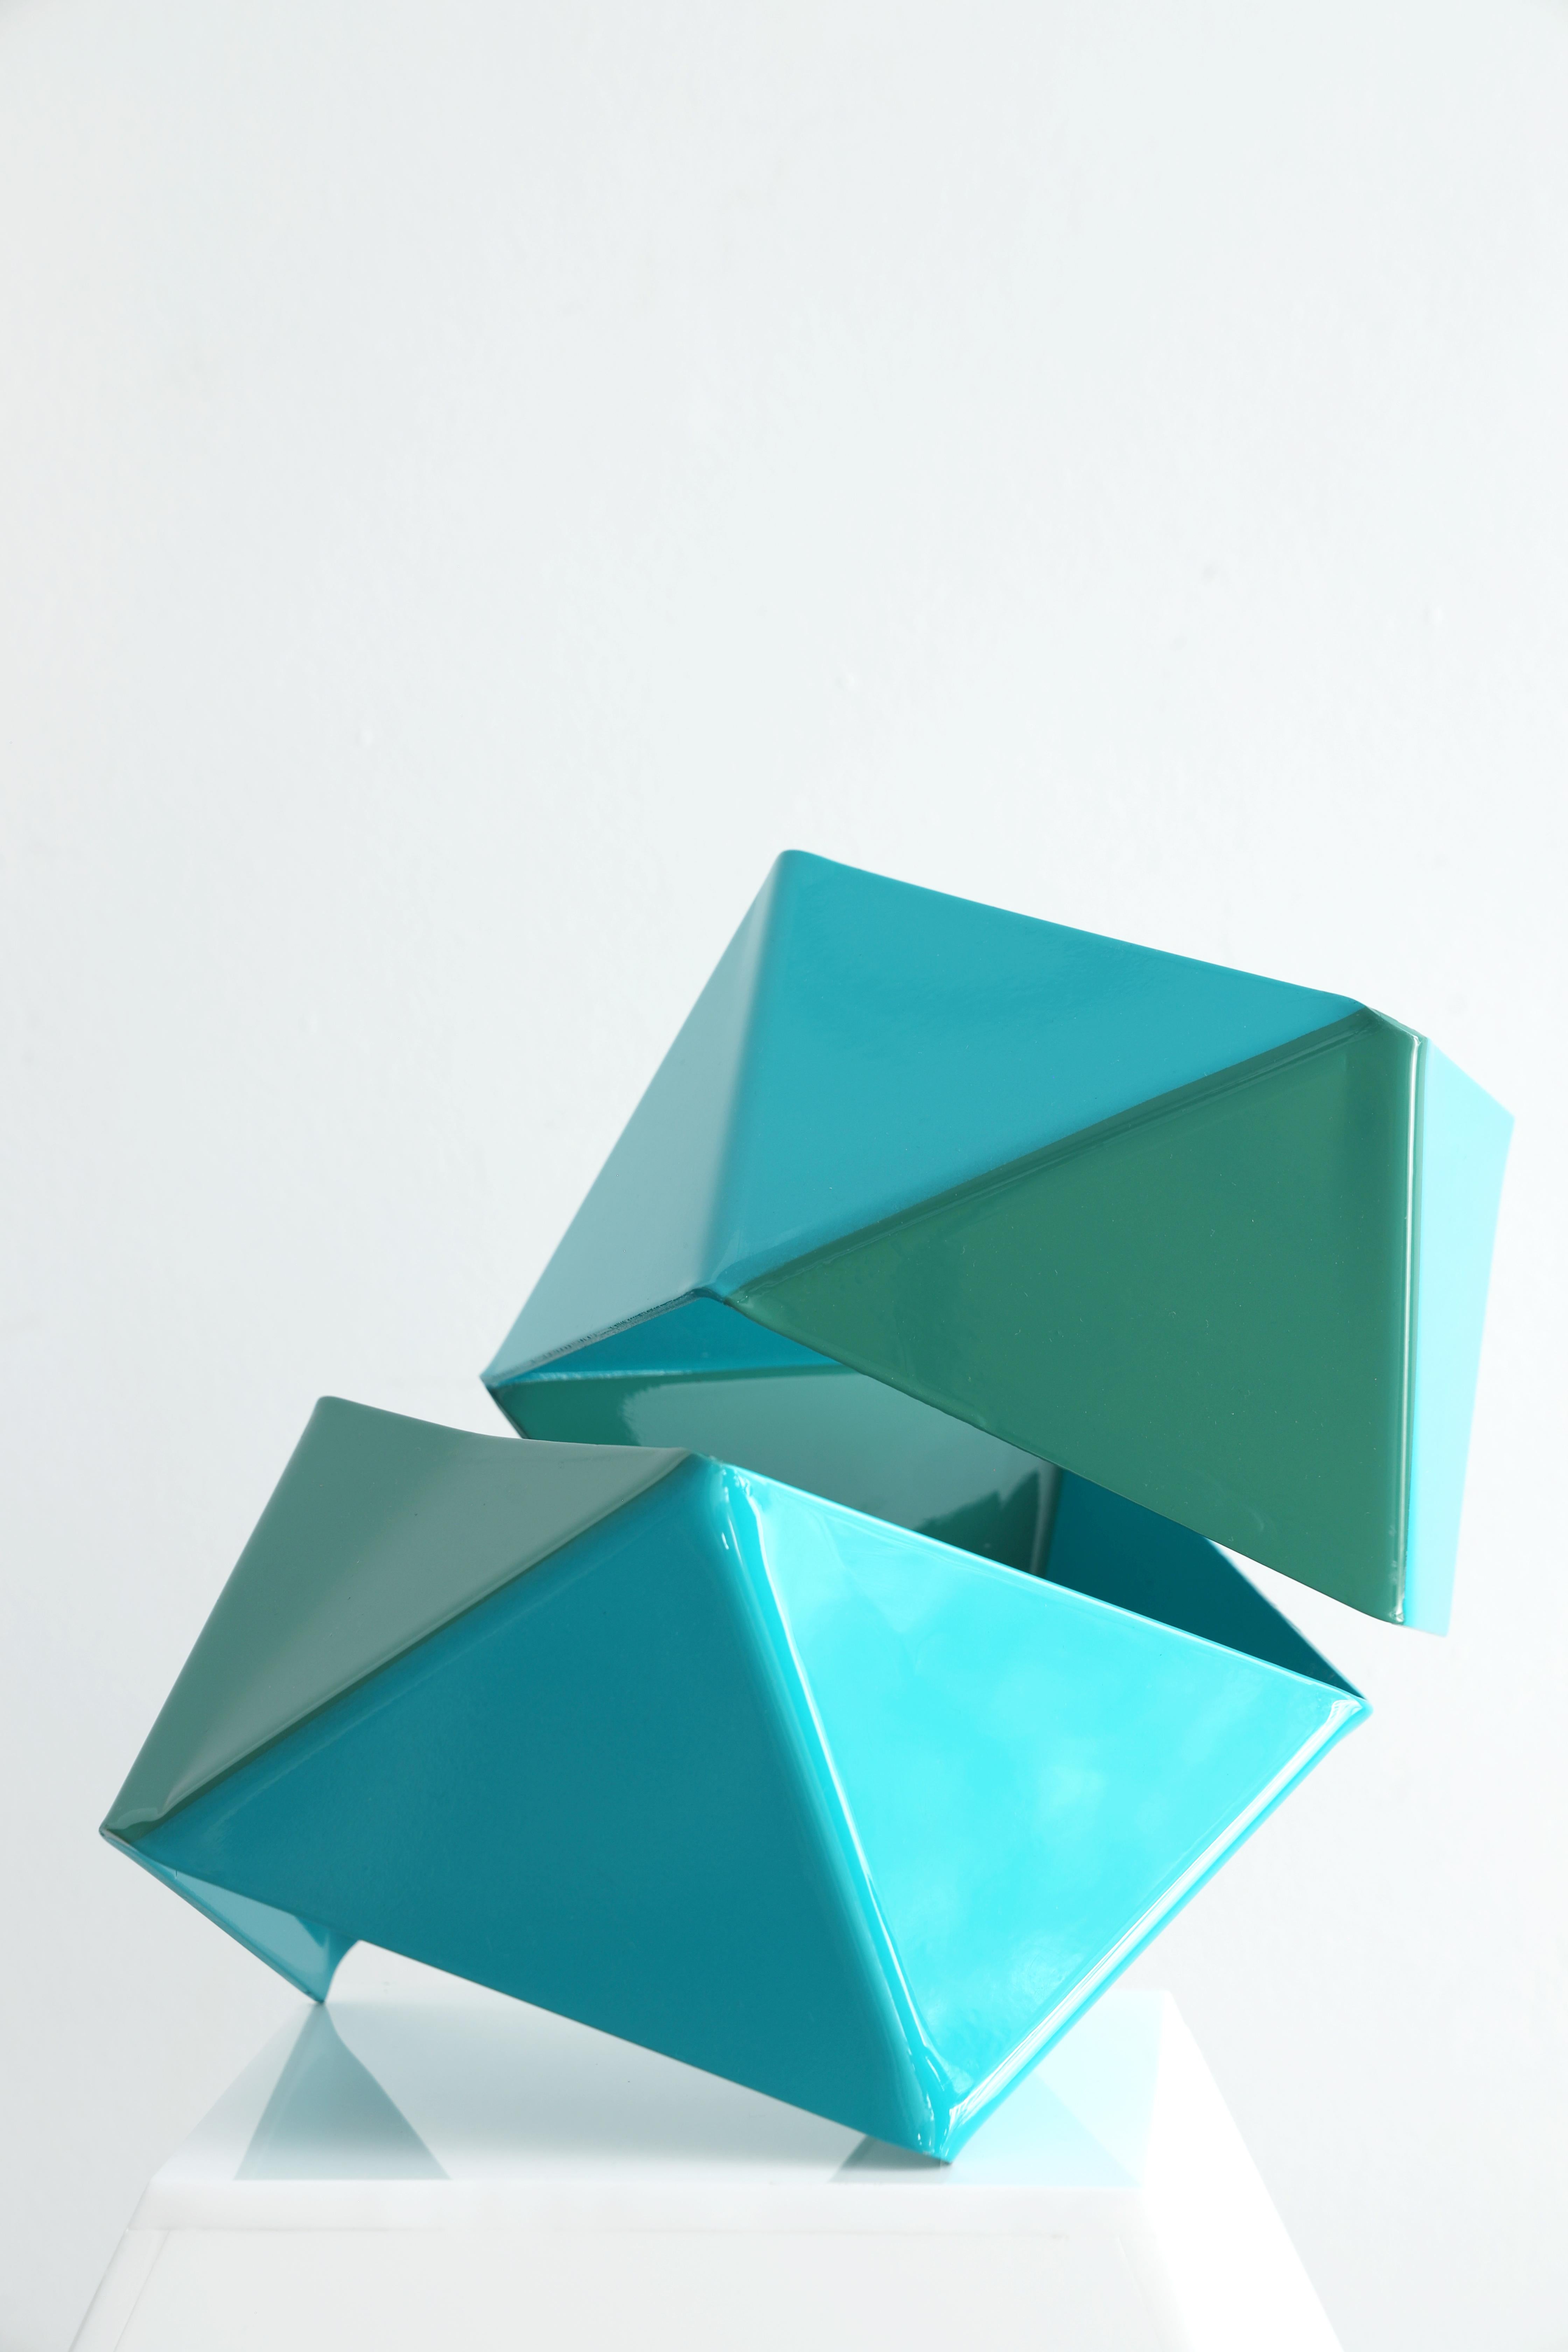 Blue and green bow tie sculpture. The sculpture is breaking in air.